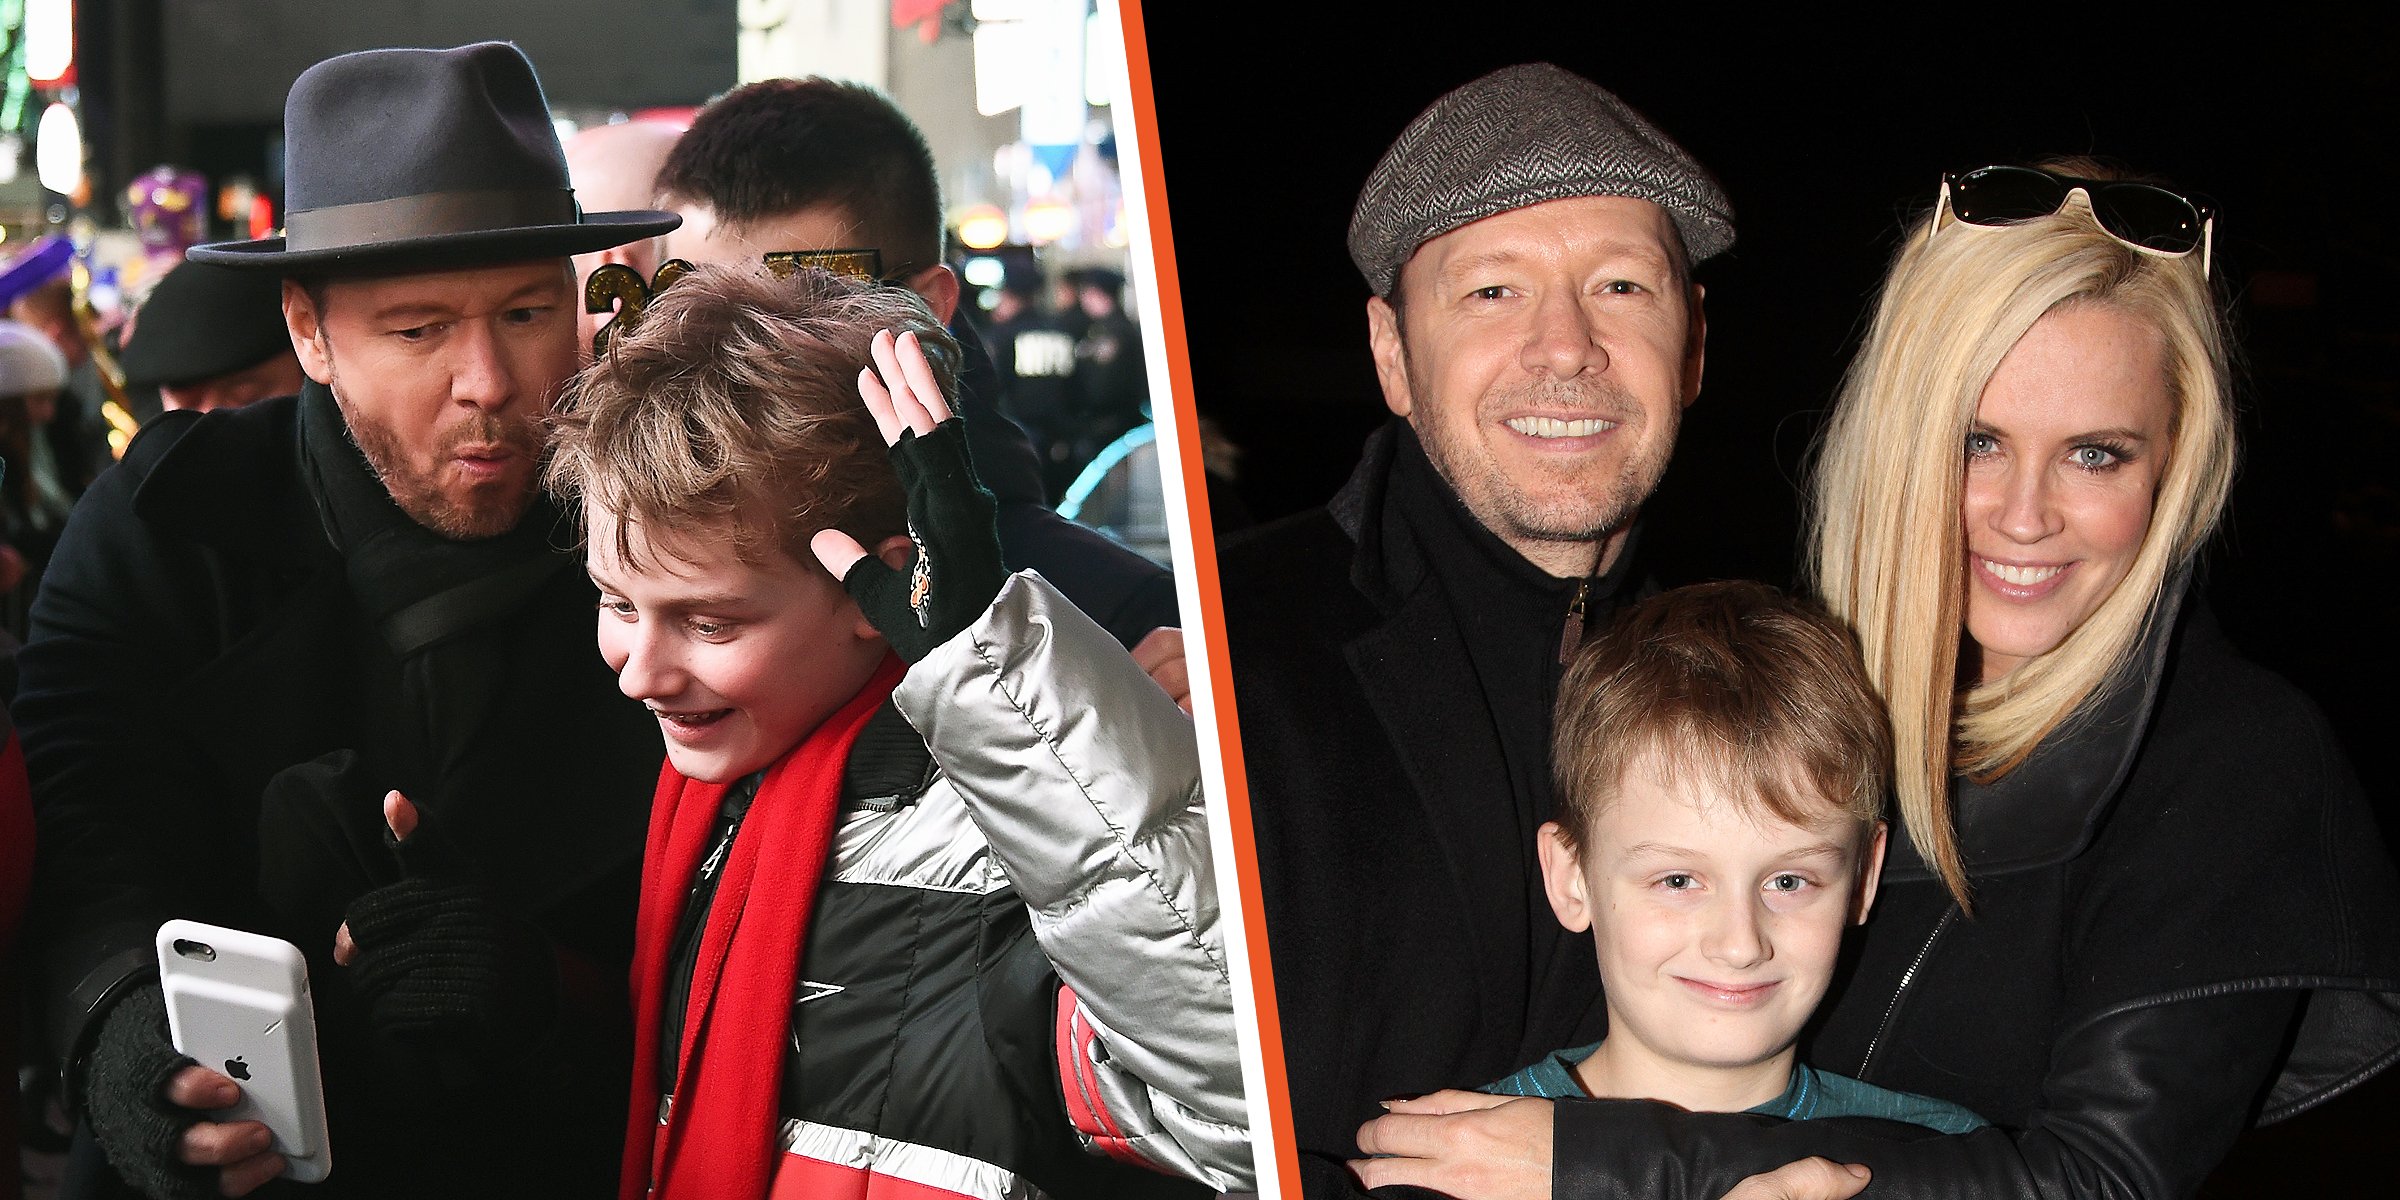 Donnie Wahlberg and his stepson, Evan | Donnie Wahlberg, Jenny McCarthy, and her son | Source: Getty Images